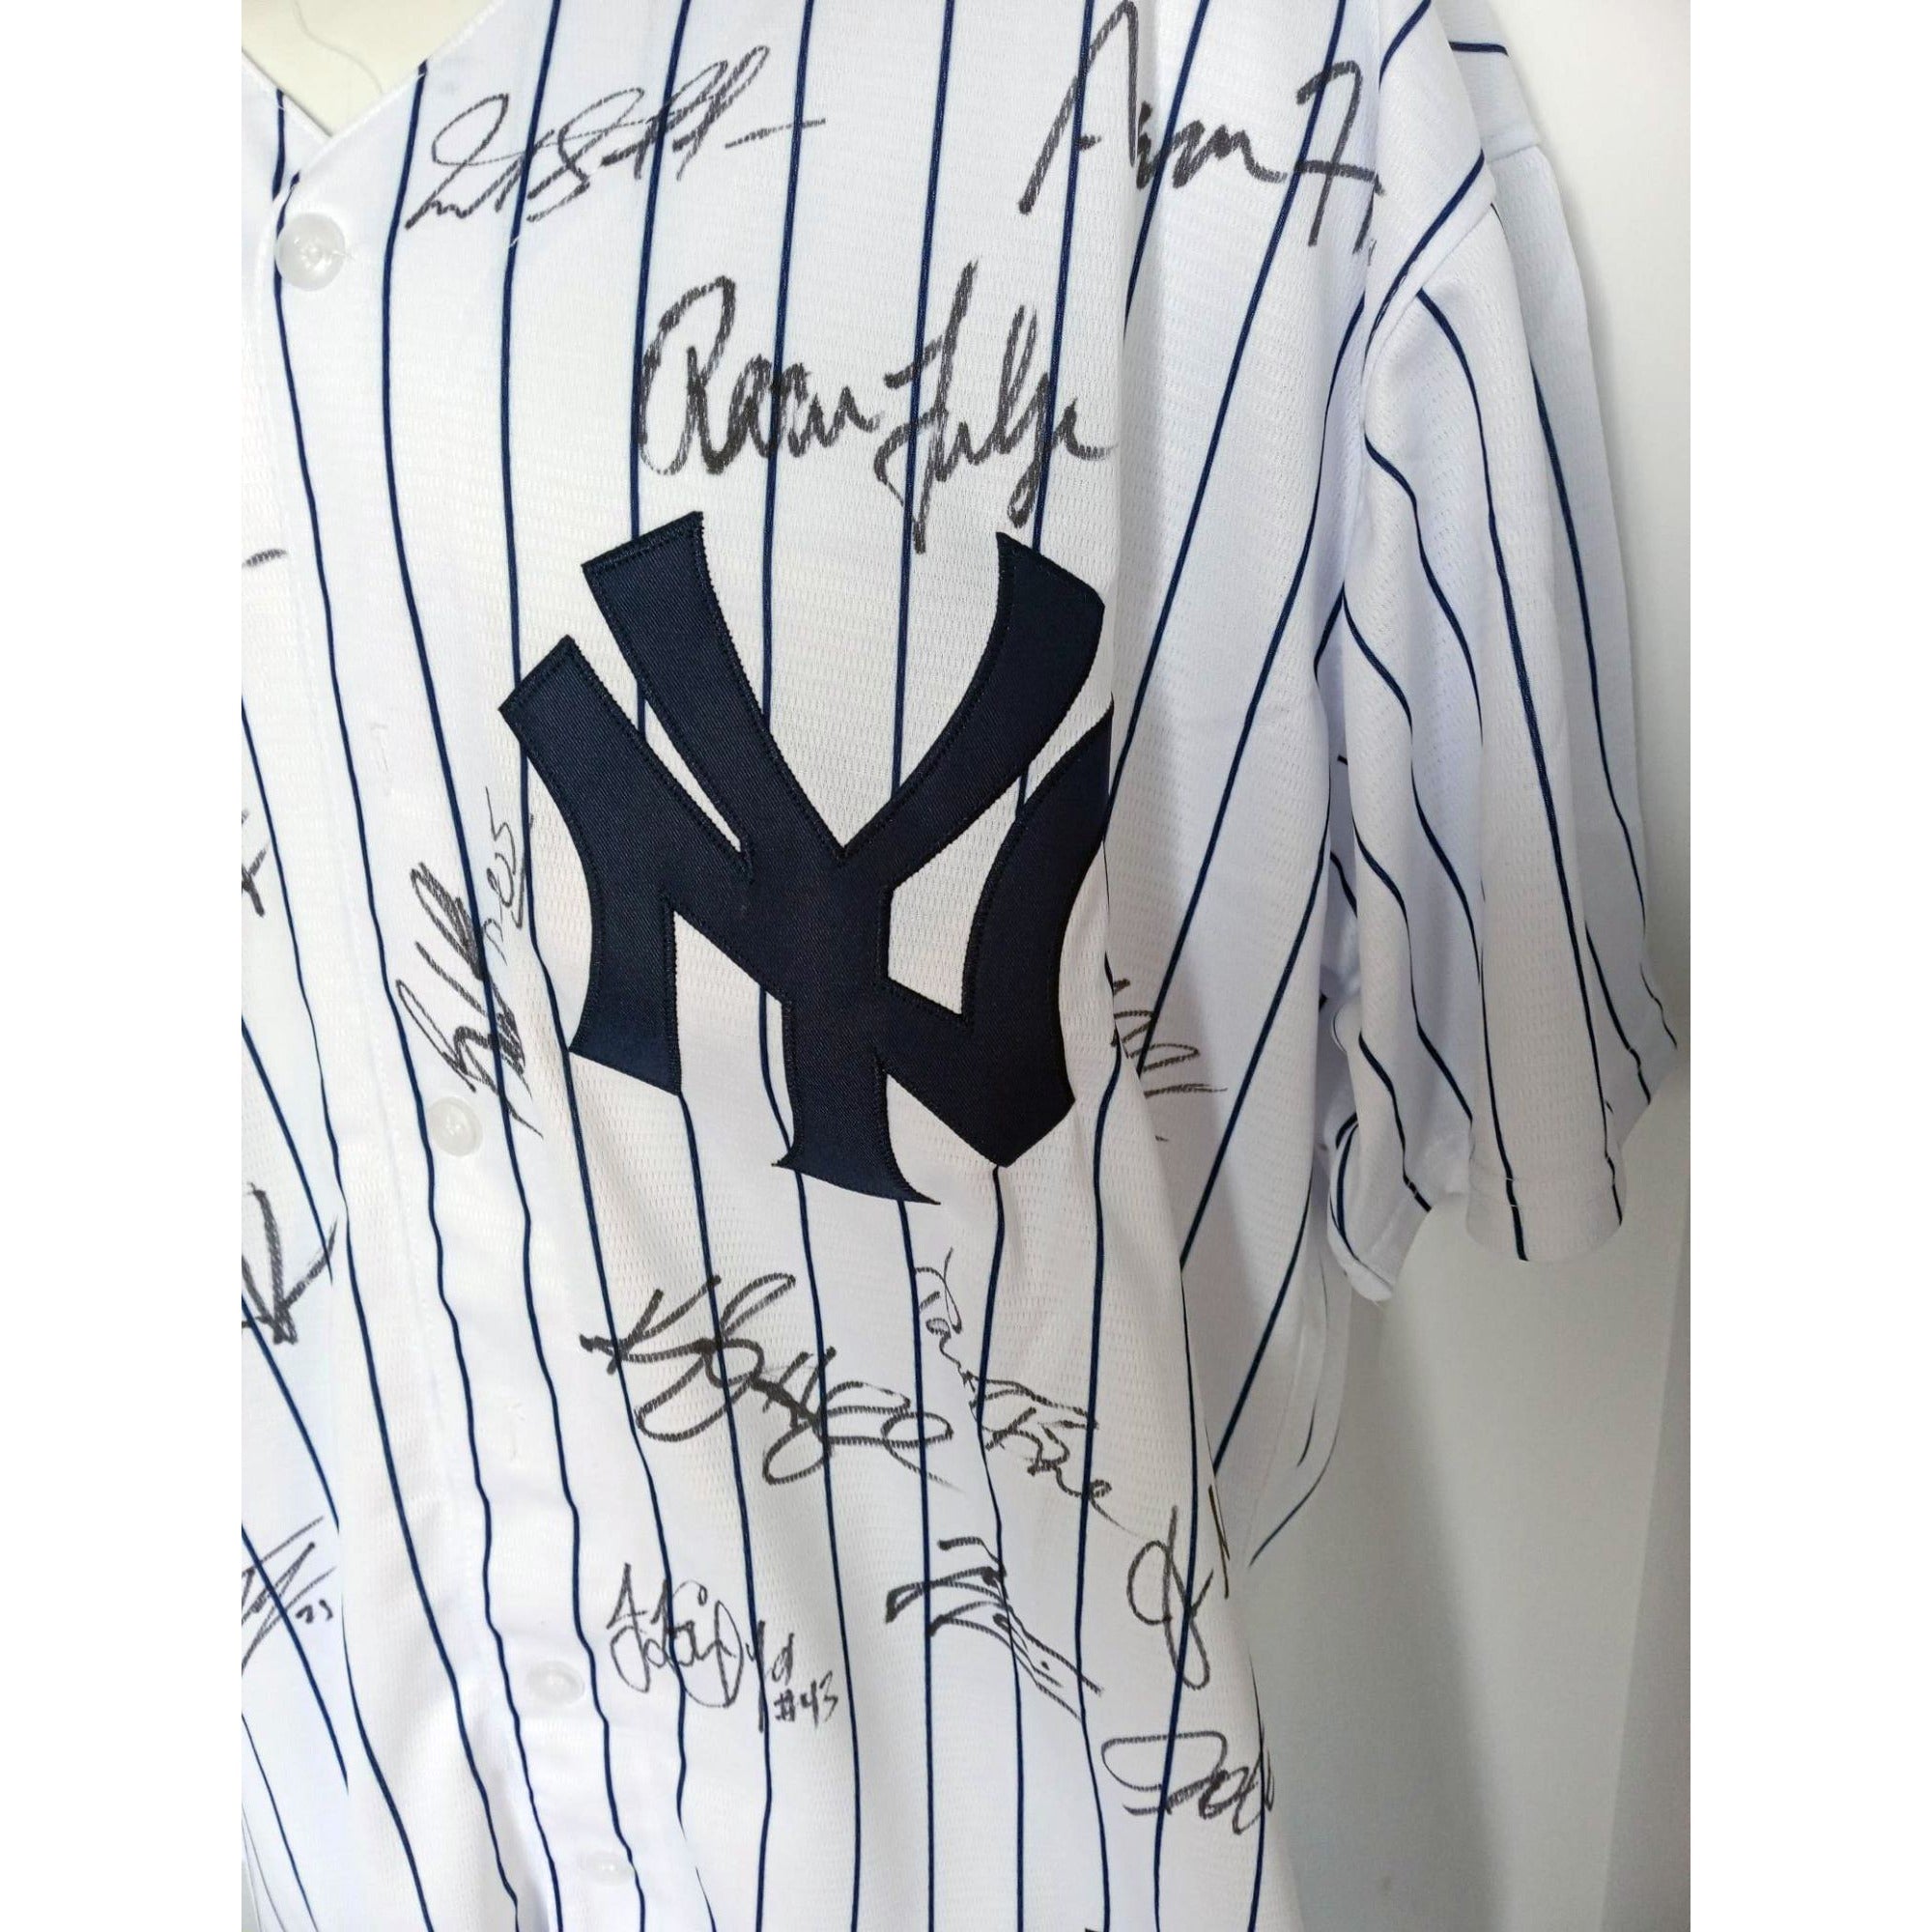 Aaron Judge 2022 New York Yankees size extra large team signed jersey with proof